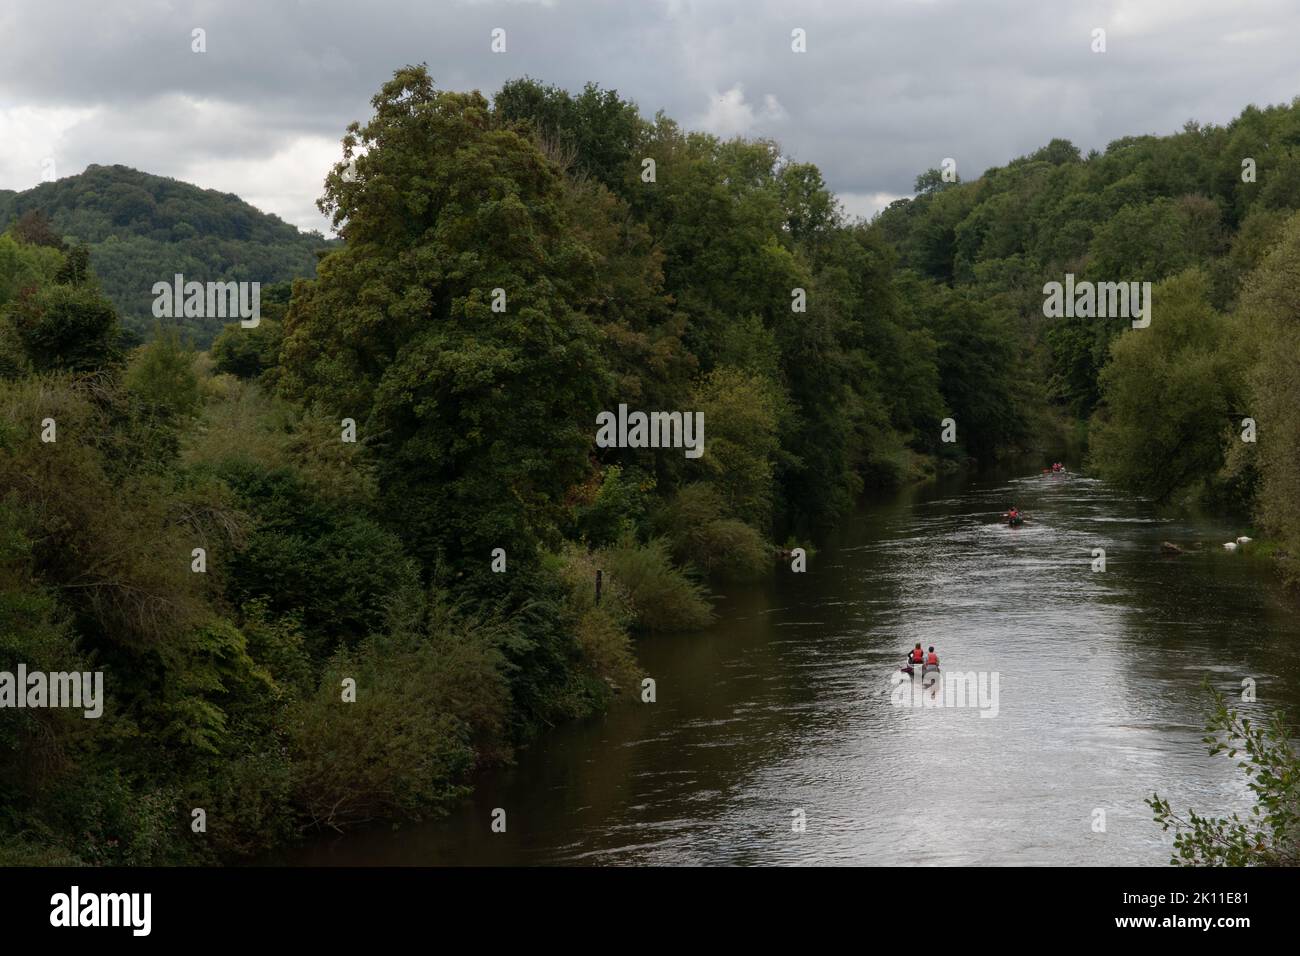 Canoeing on the River Wye near Welsh Bicknor, on the Herefordshire and Gloucestershire border, England, UK Stock Photo